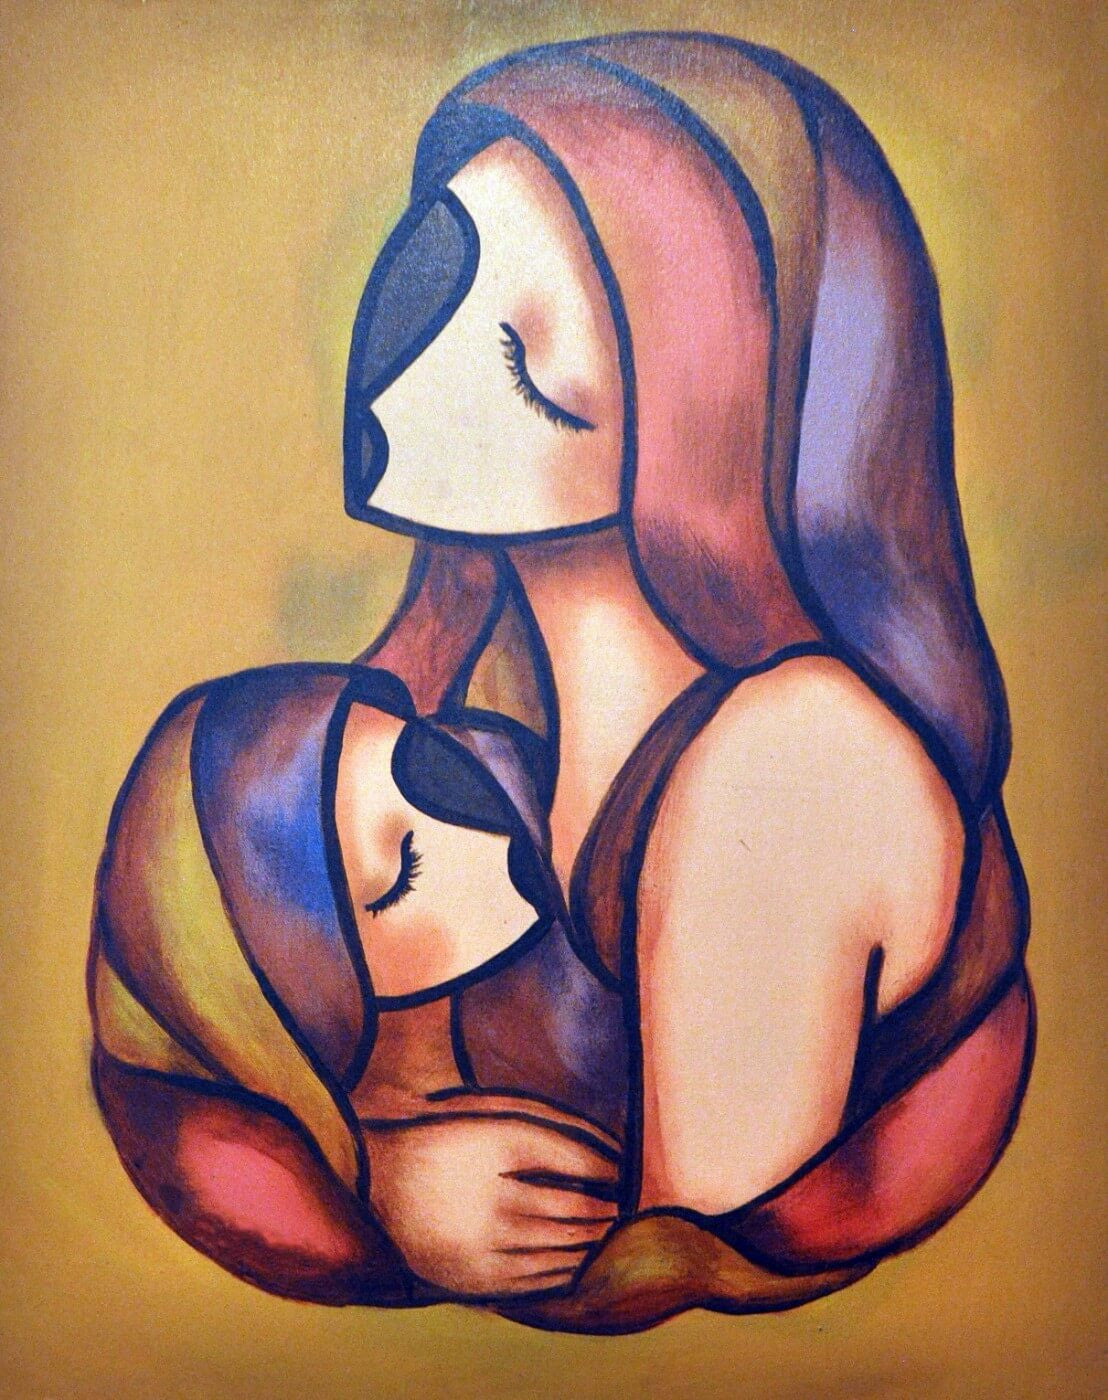 Mother And Child - Art Prints by Emanuel Bennett | Buy Posters ...